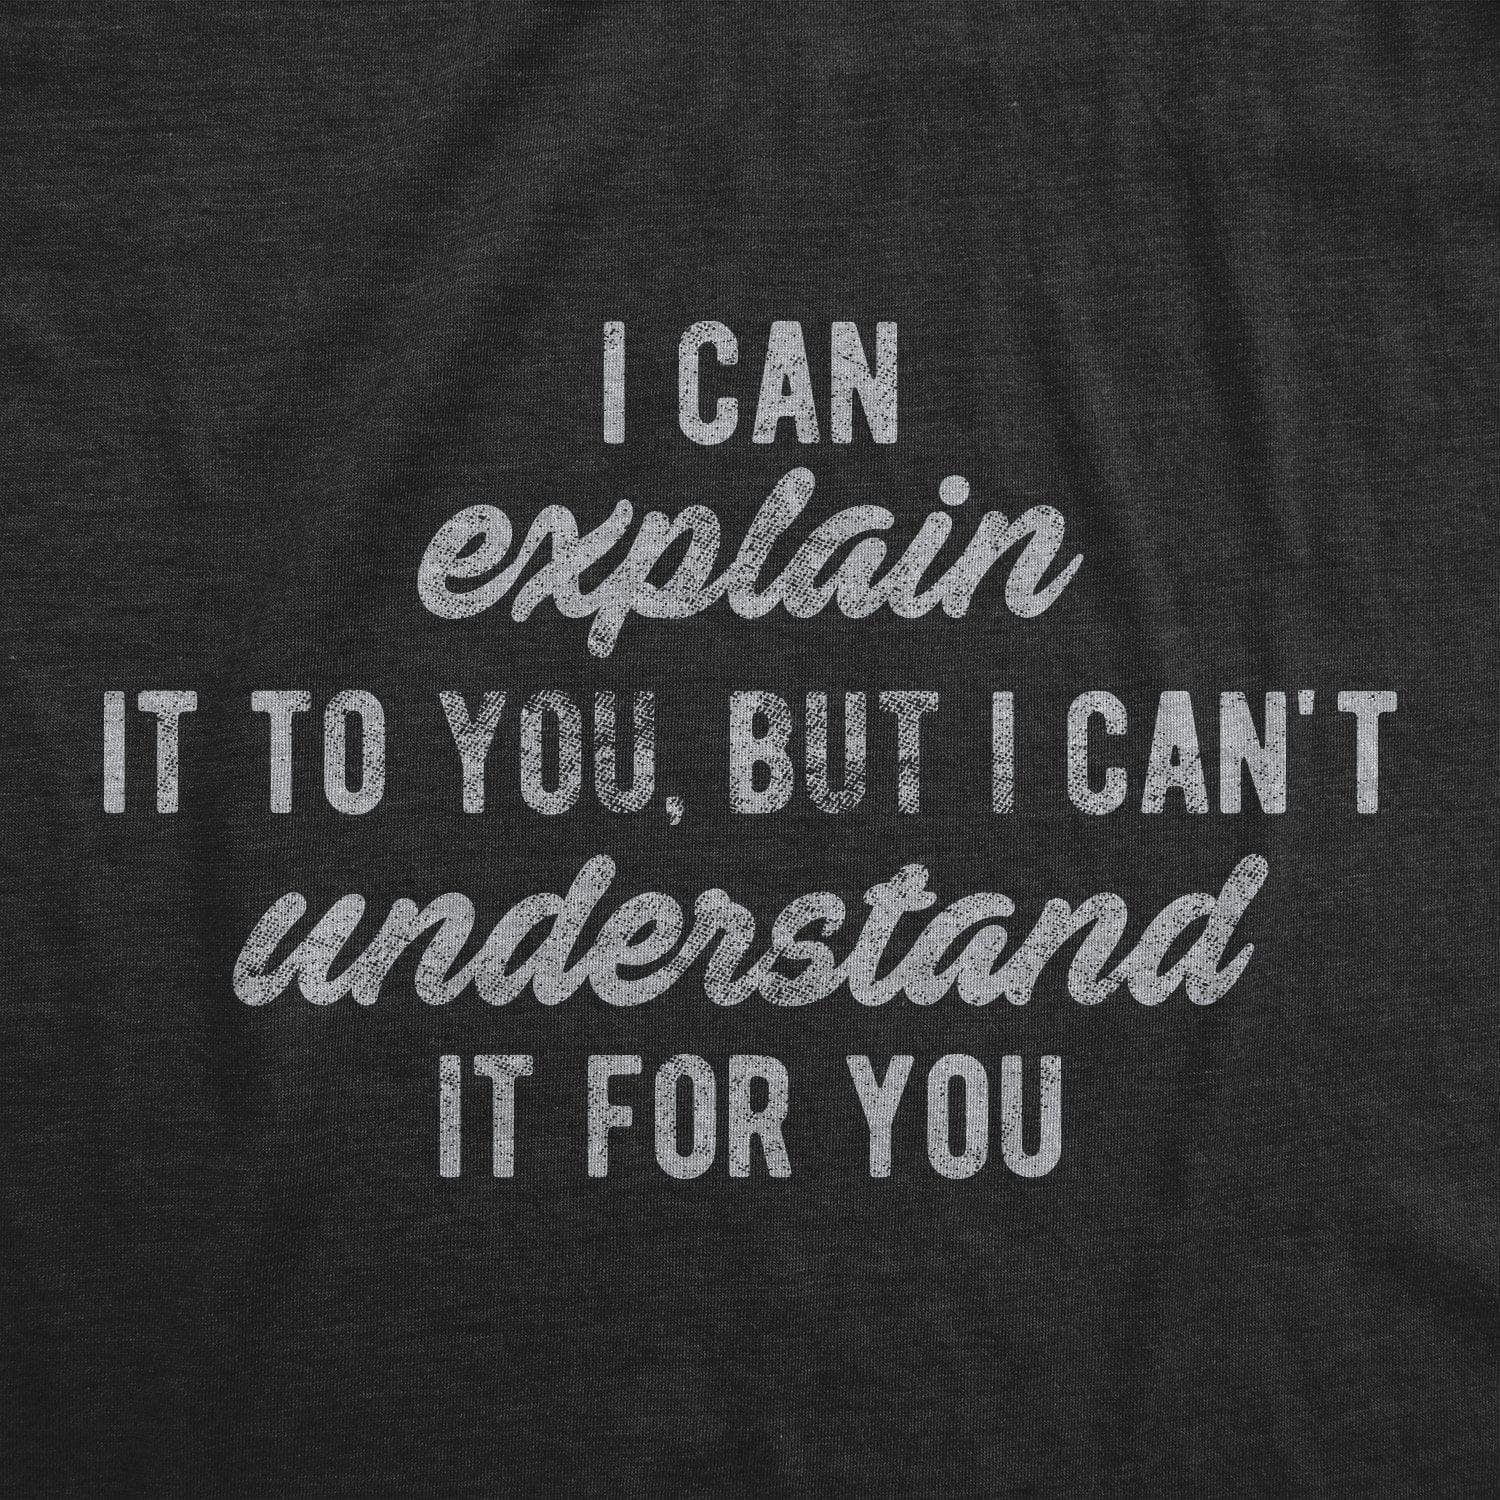 I Can't Understand It For You Men's Tshirt - Crazy Dog T-Shirts